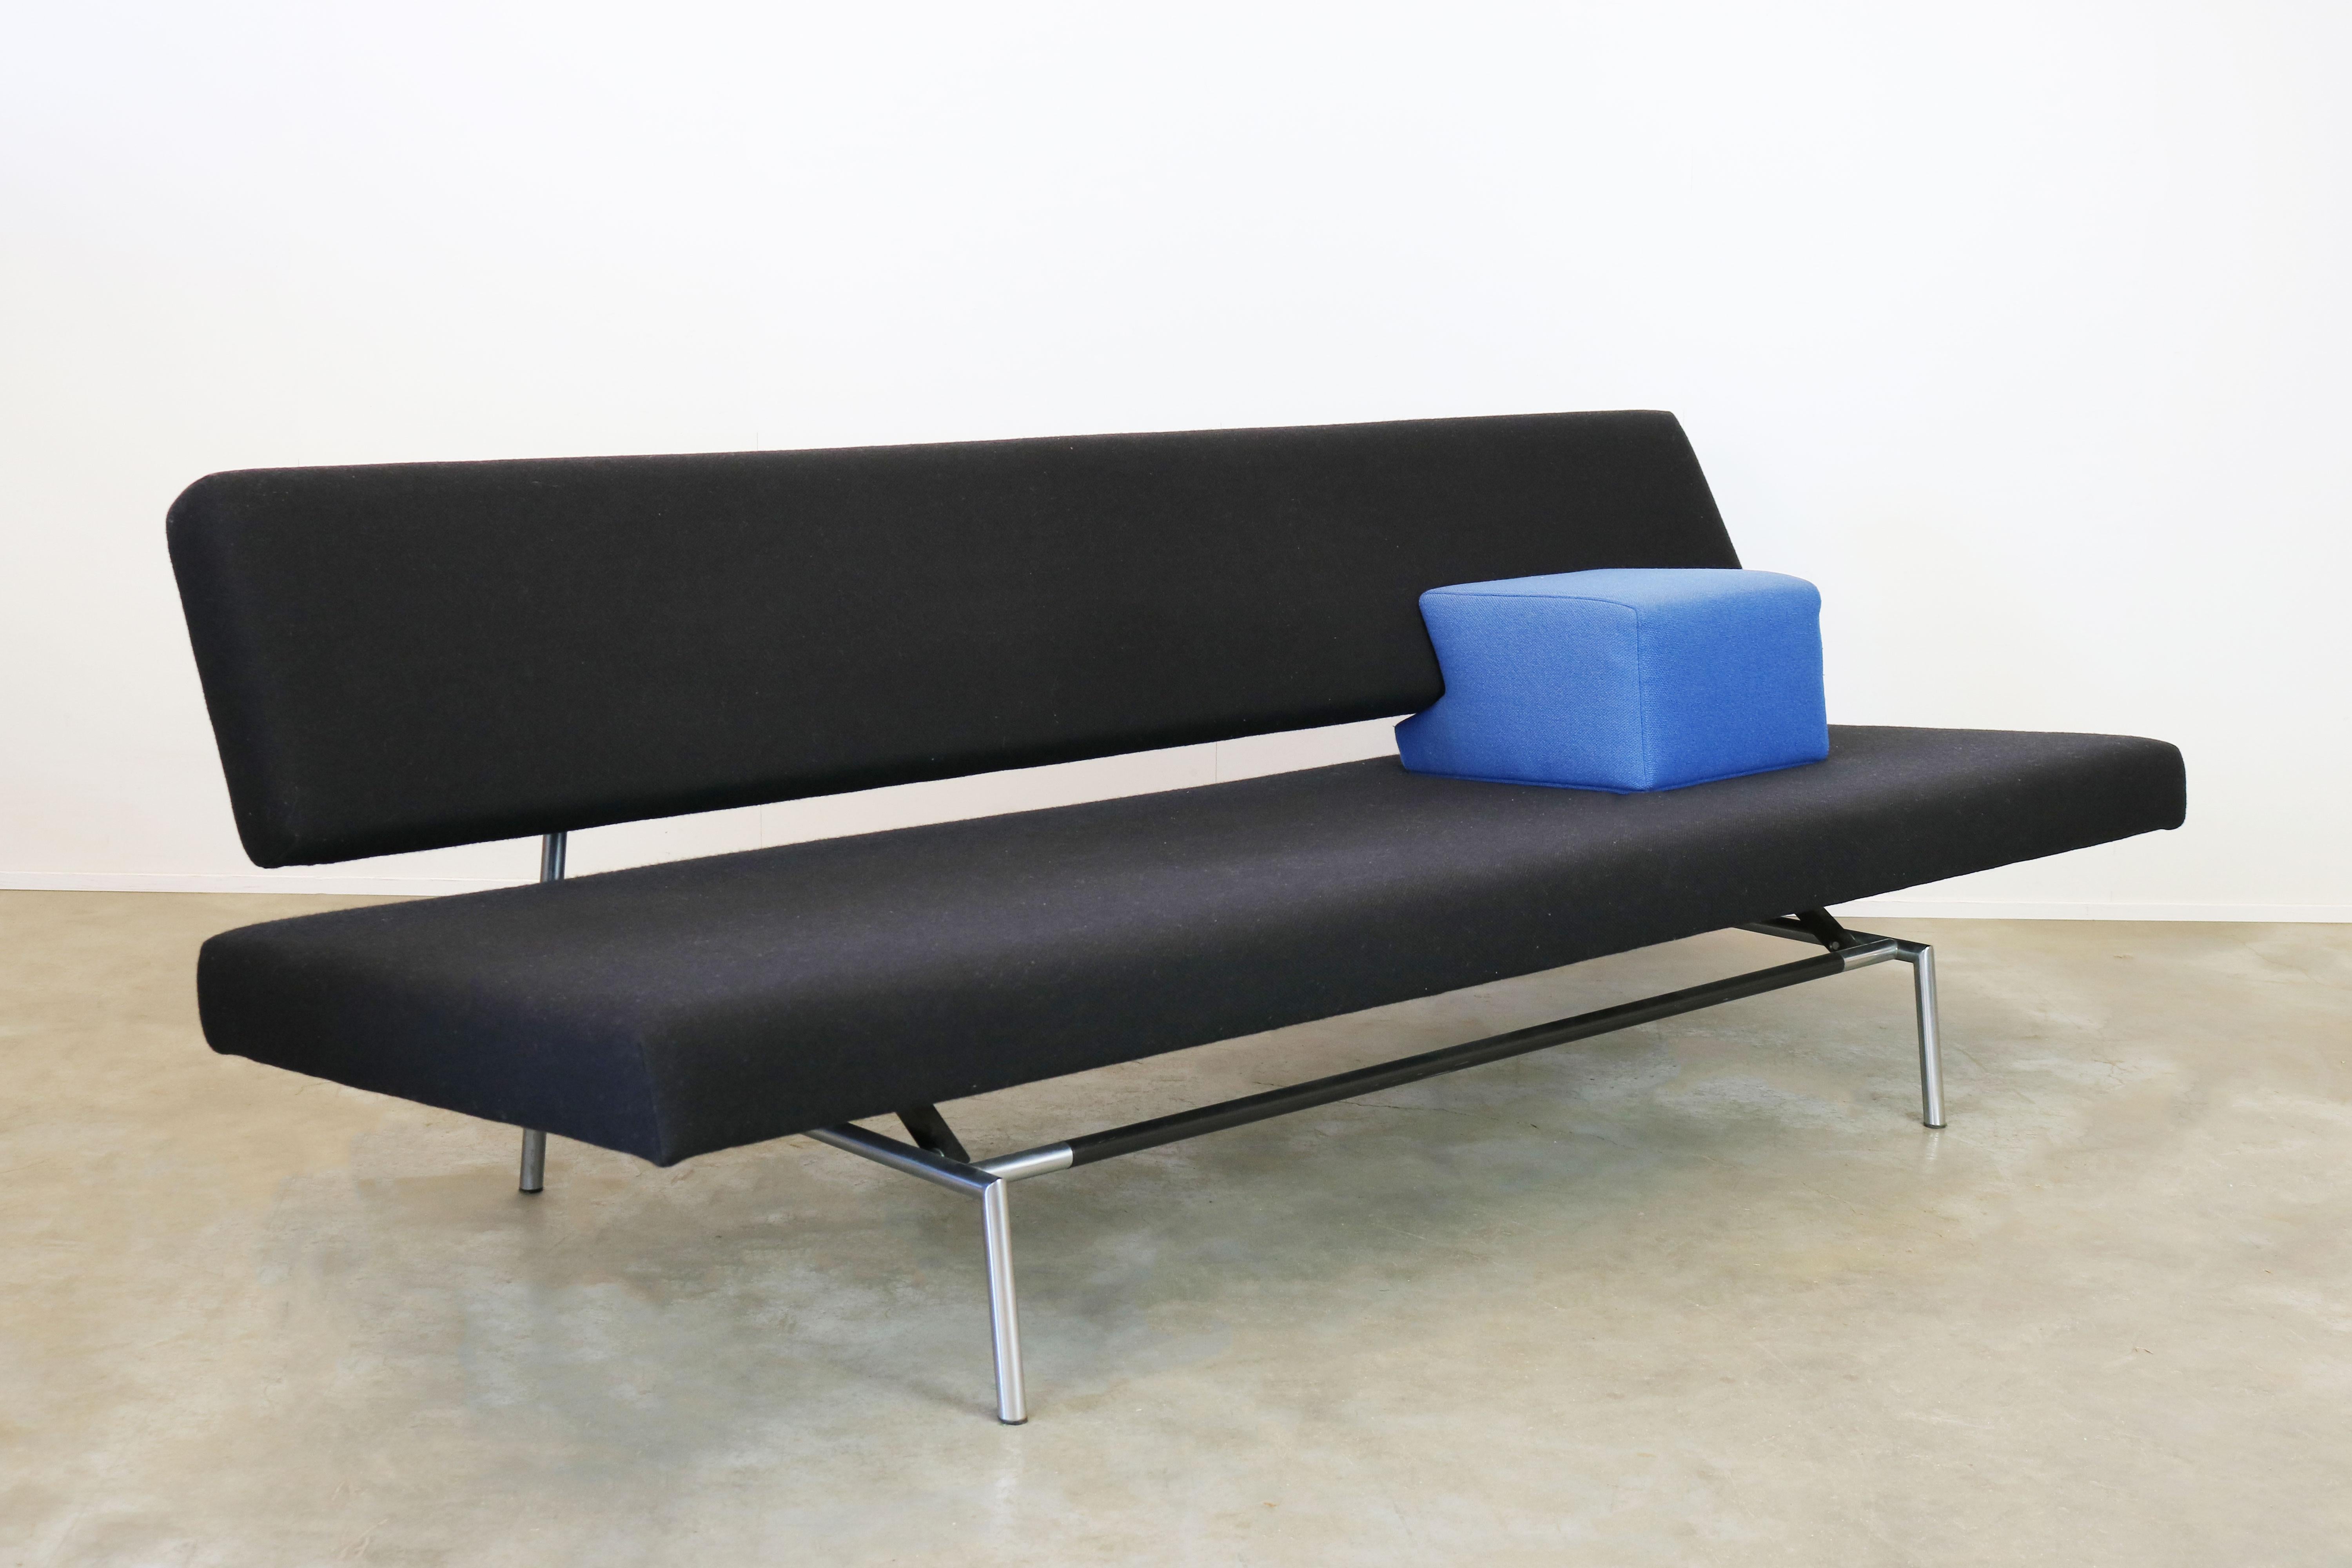 Wonderful Dutch Minimalist modern design sofa / daybed model ''BR02'' designed by Martin Visser for Spectrum 1960s. Magnificent minimalist design with tubular chrome frame with black accent and cubic armrest in blue. The sofa is upholsterd in its